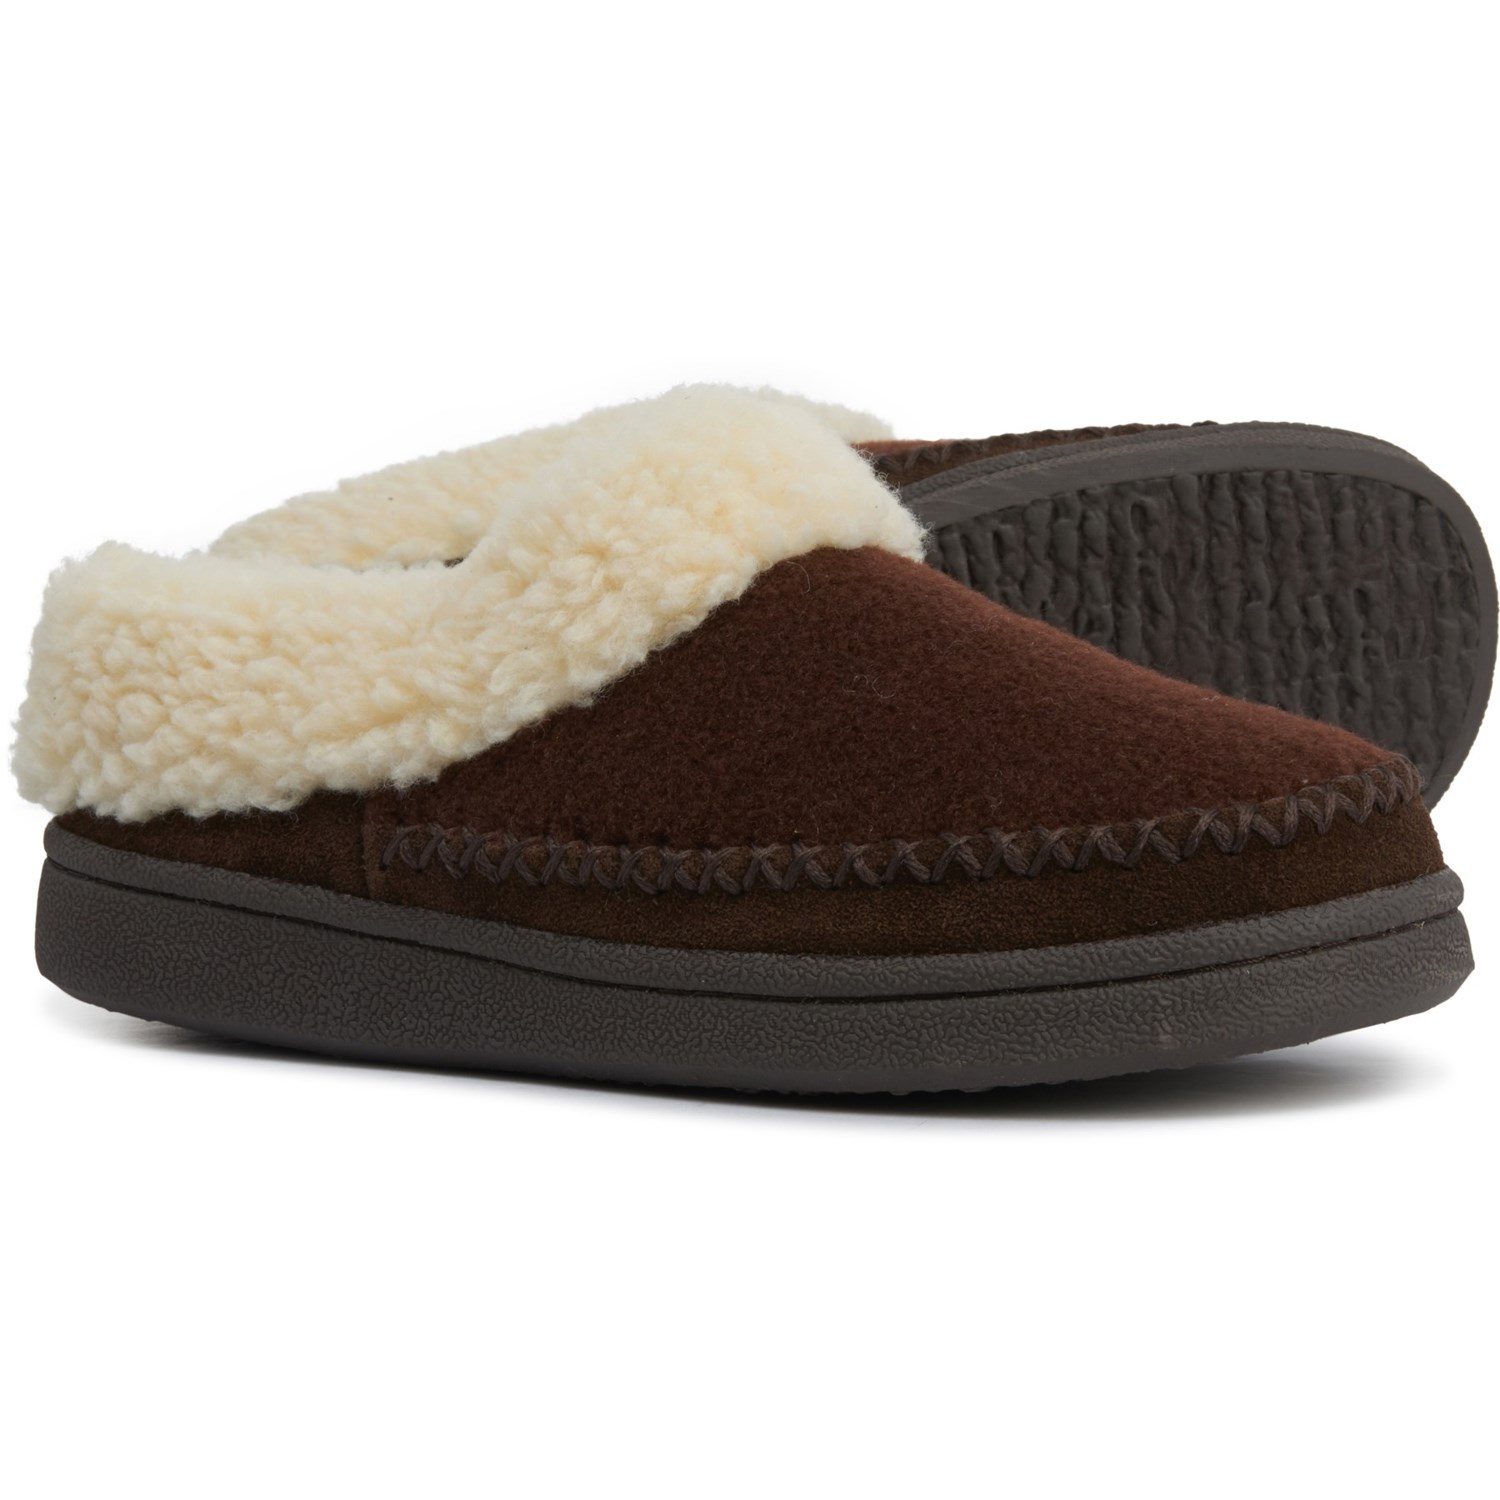 clarks shoes womens slippers